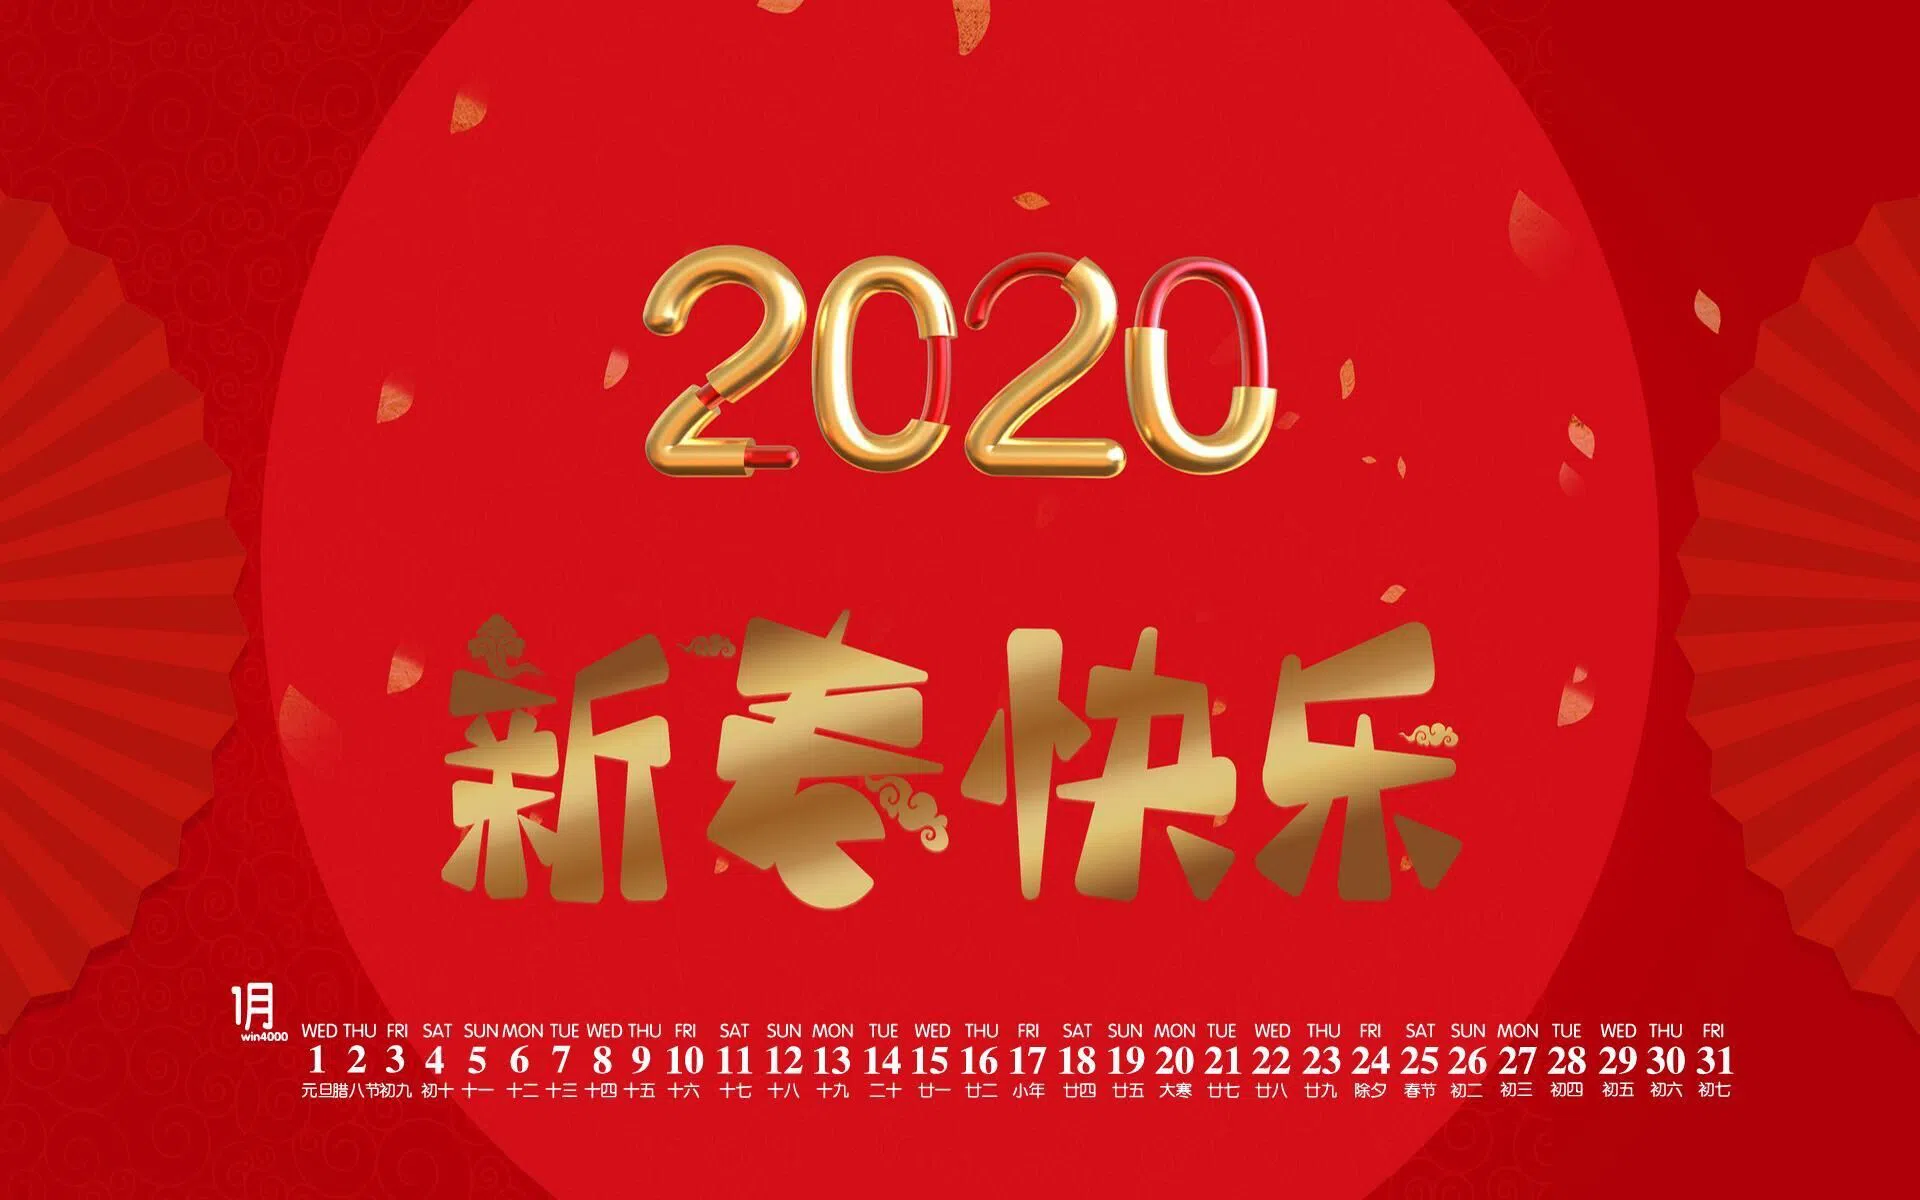  All the staff of Henan Henry Metal Material  Co.,Ltd  wish you a happy new year in 2020